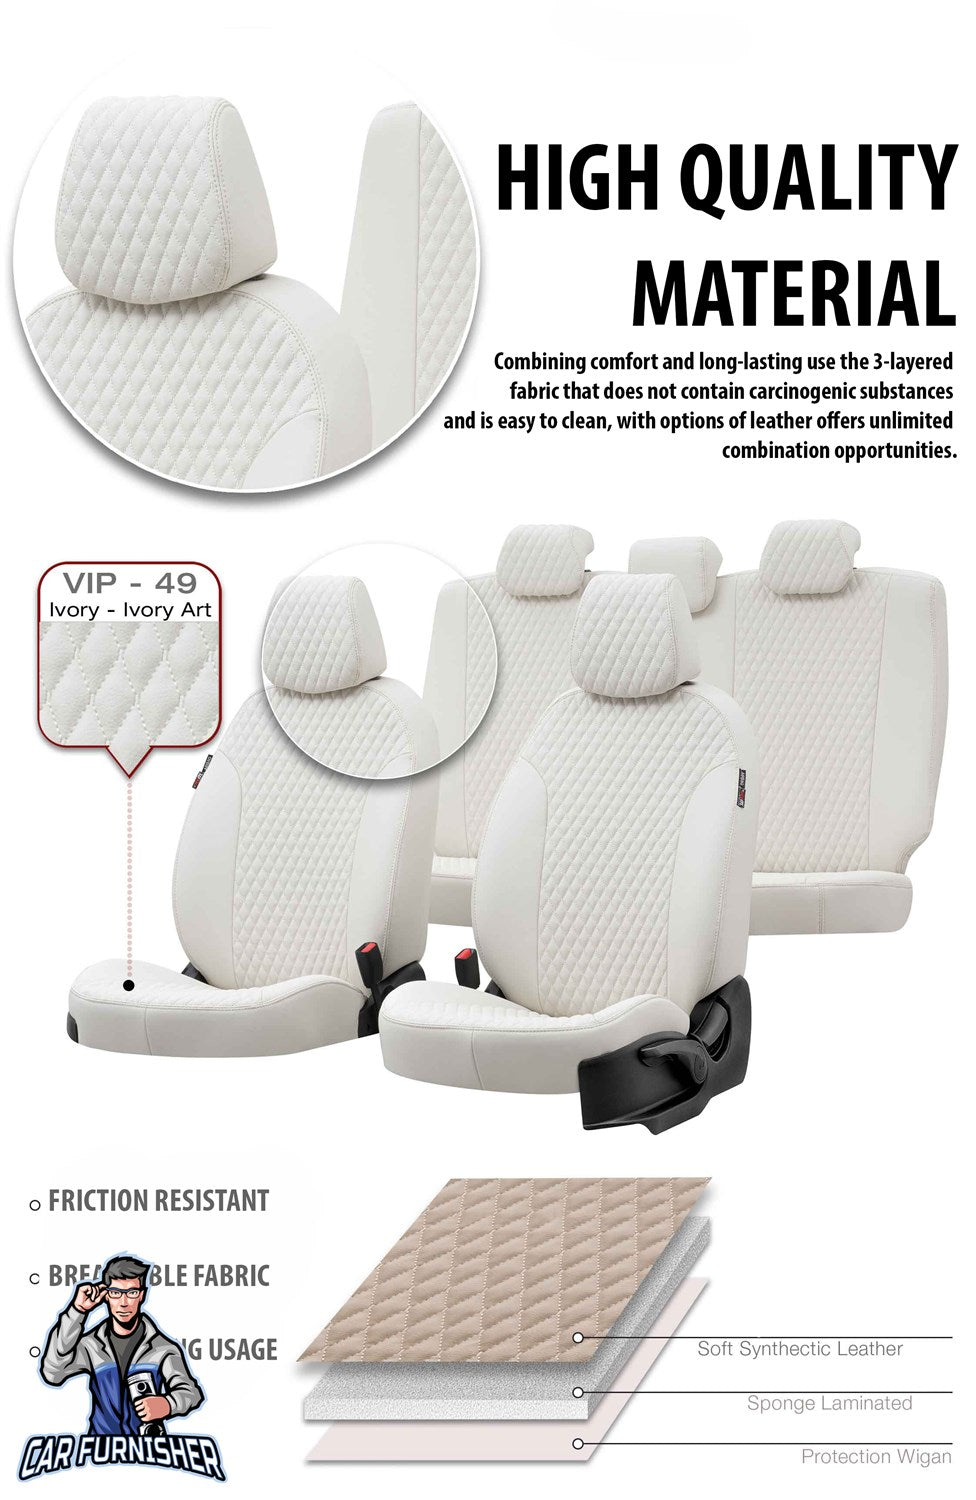 Renault Fluence Seat Covers Amsterdam Leather Design Beige Leather